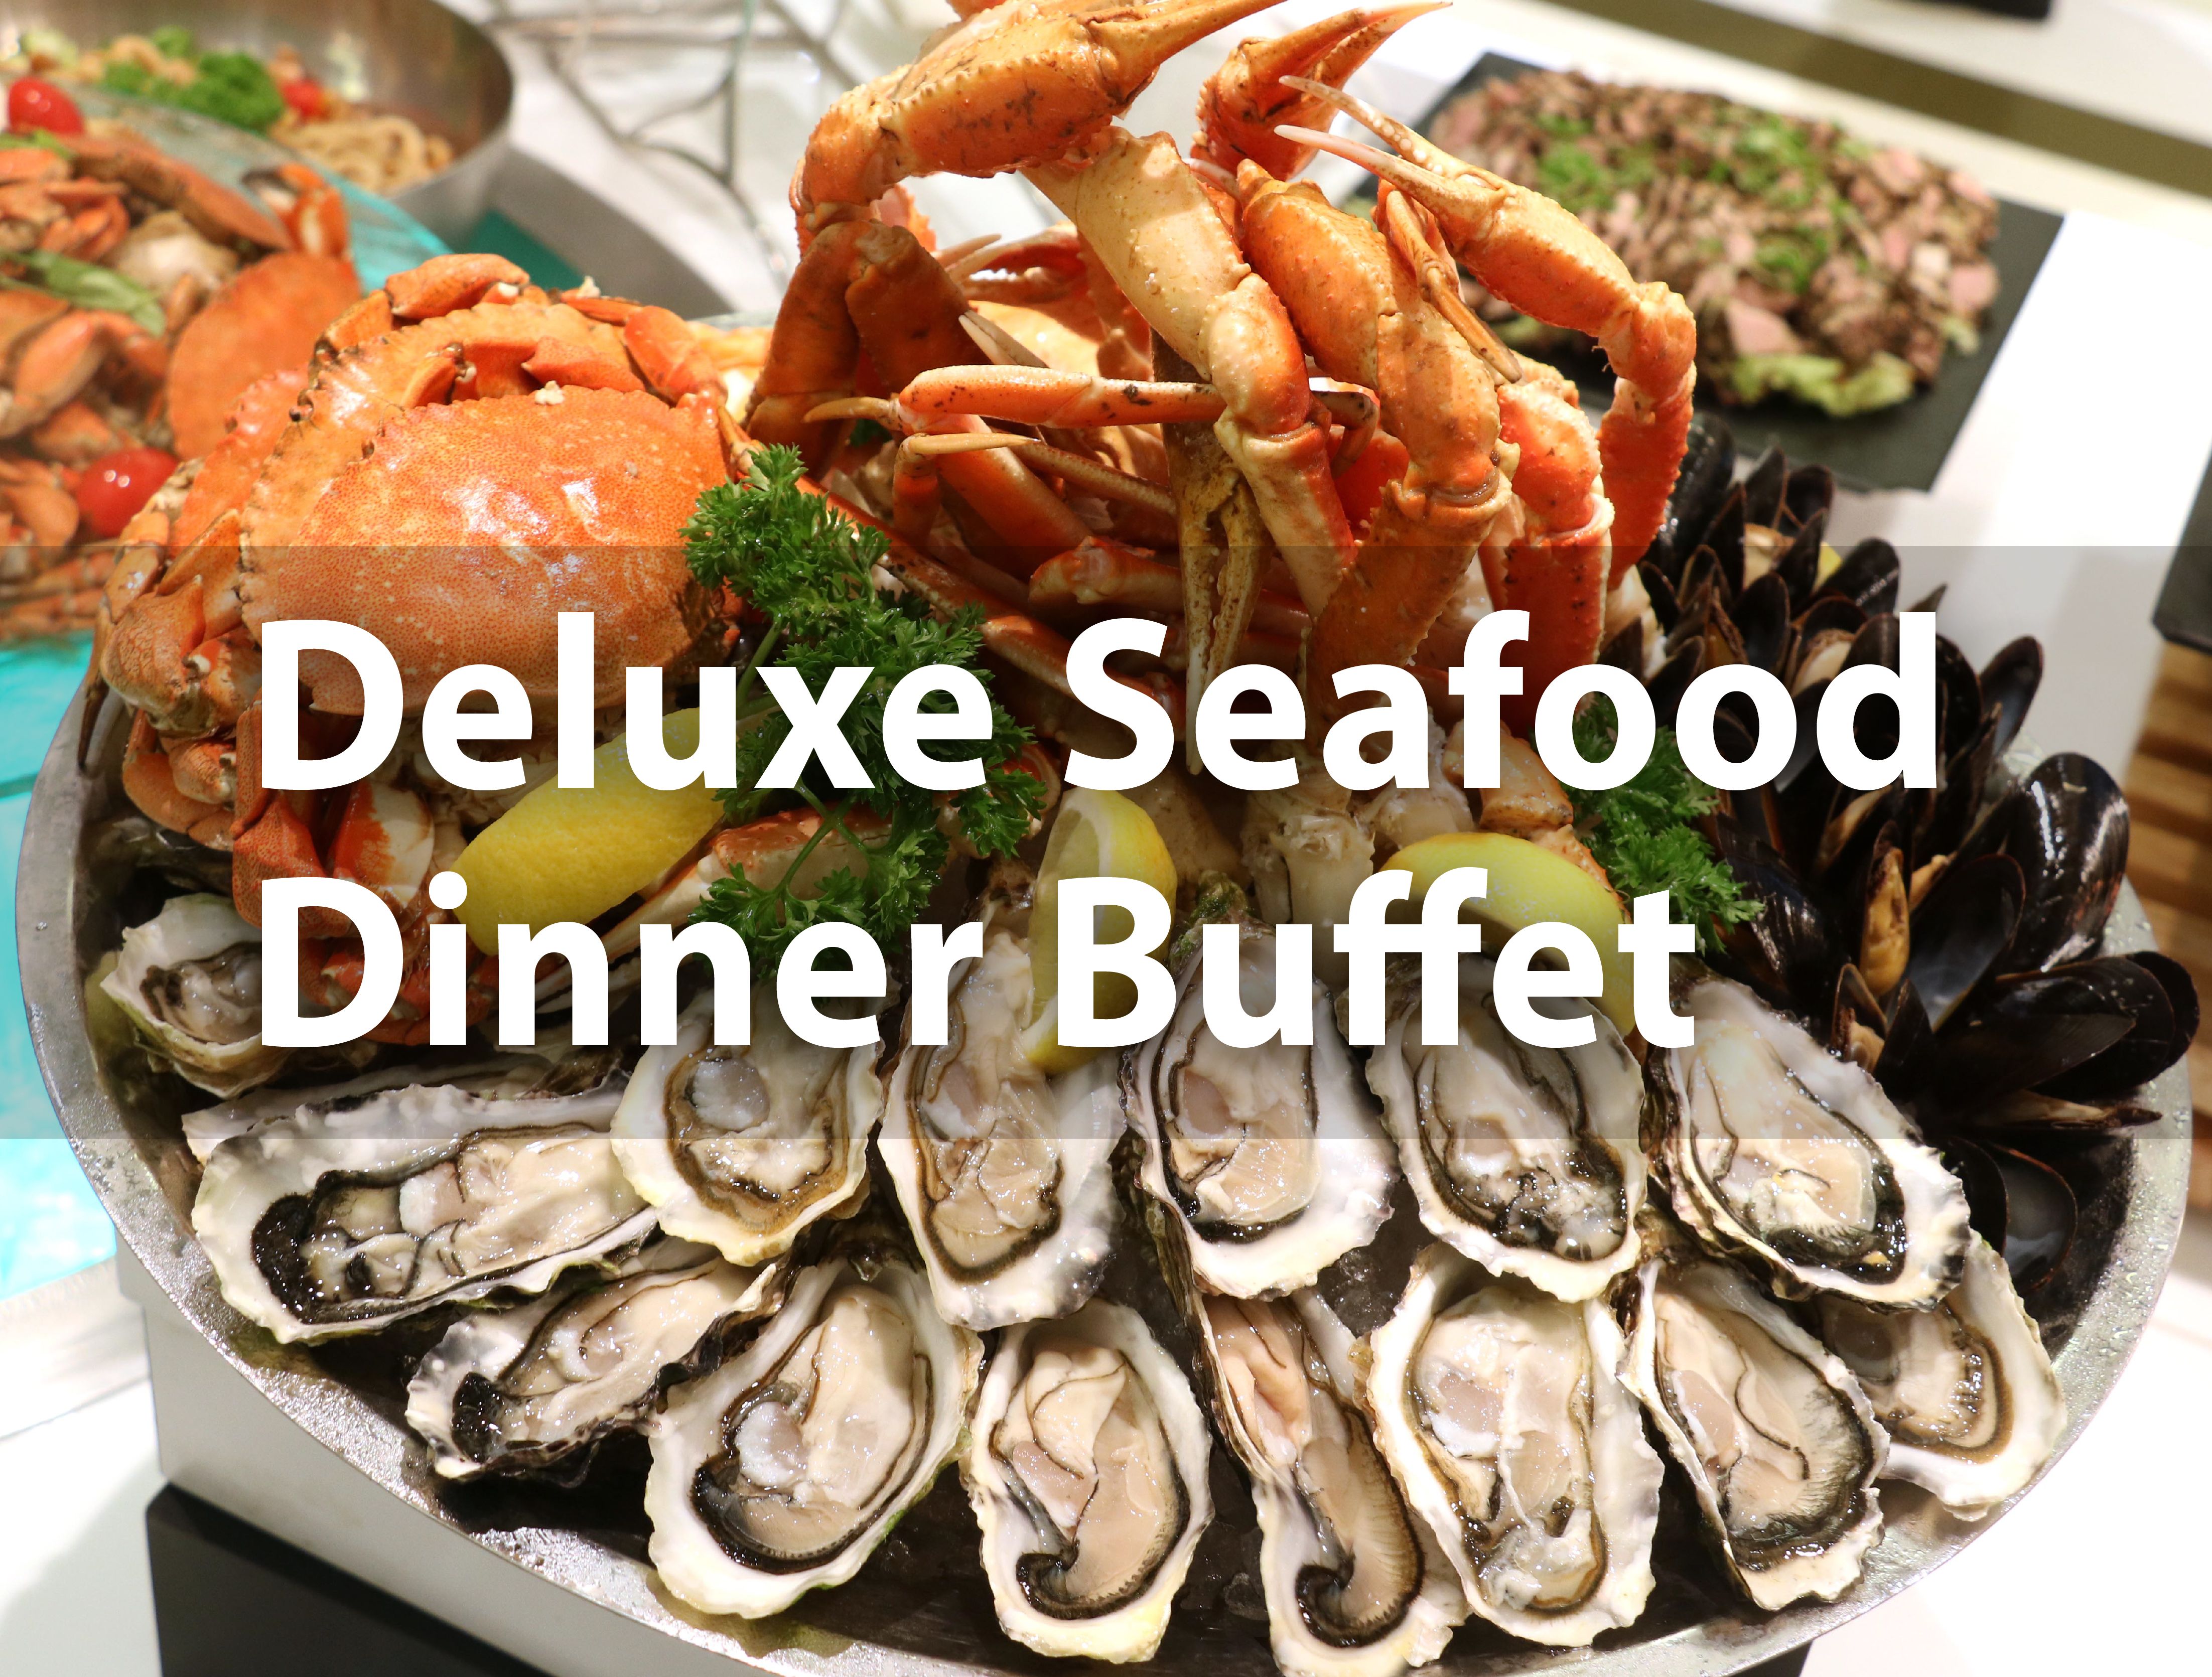 Sonata Deluxe Seafood Dinner Buffet Promotion